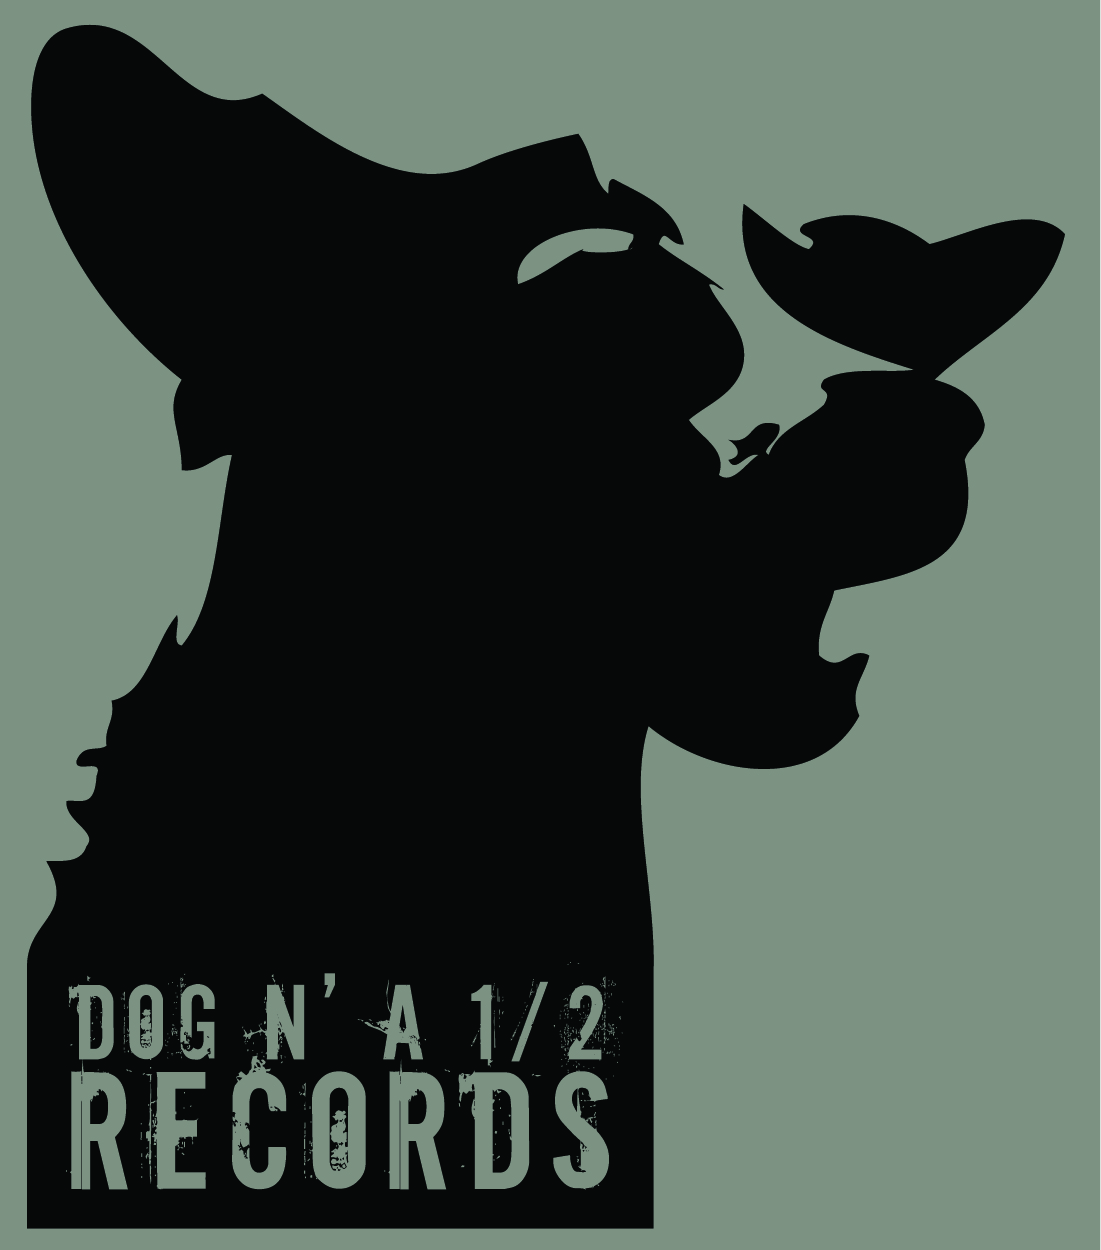 Client: Dog n' a 1/2 Records. Description: Created a new logo for this Record Label.